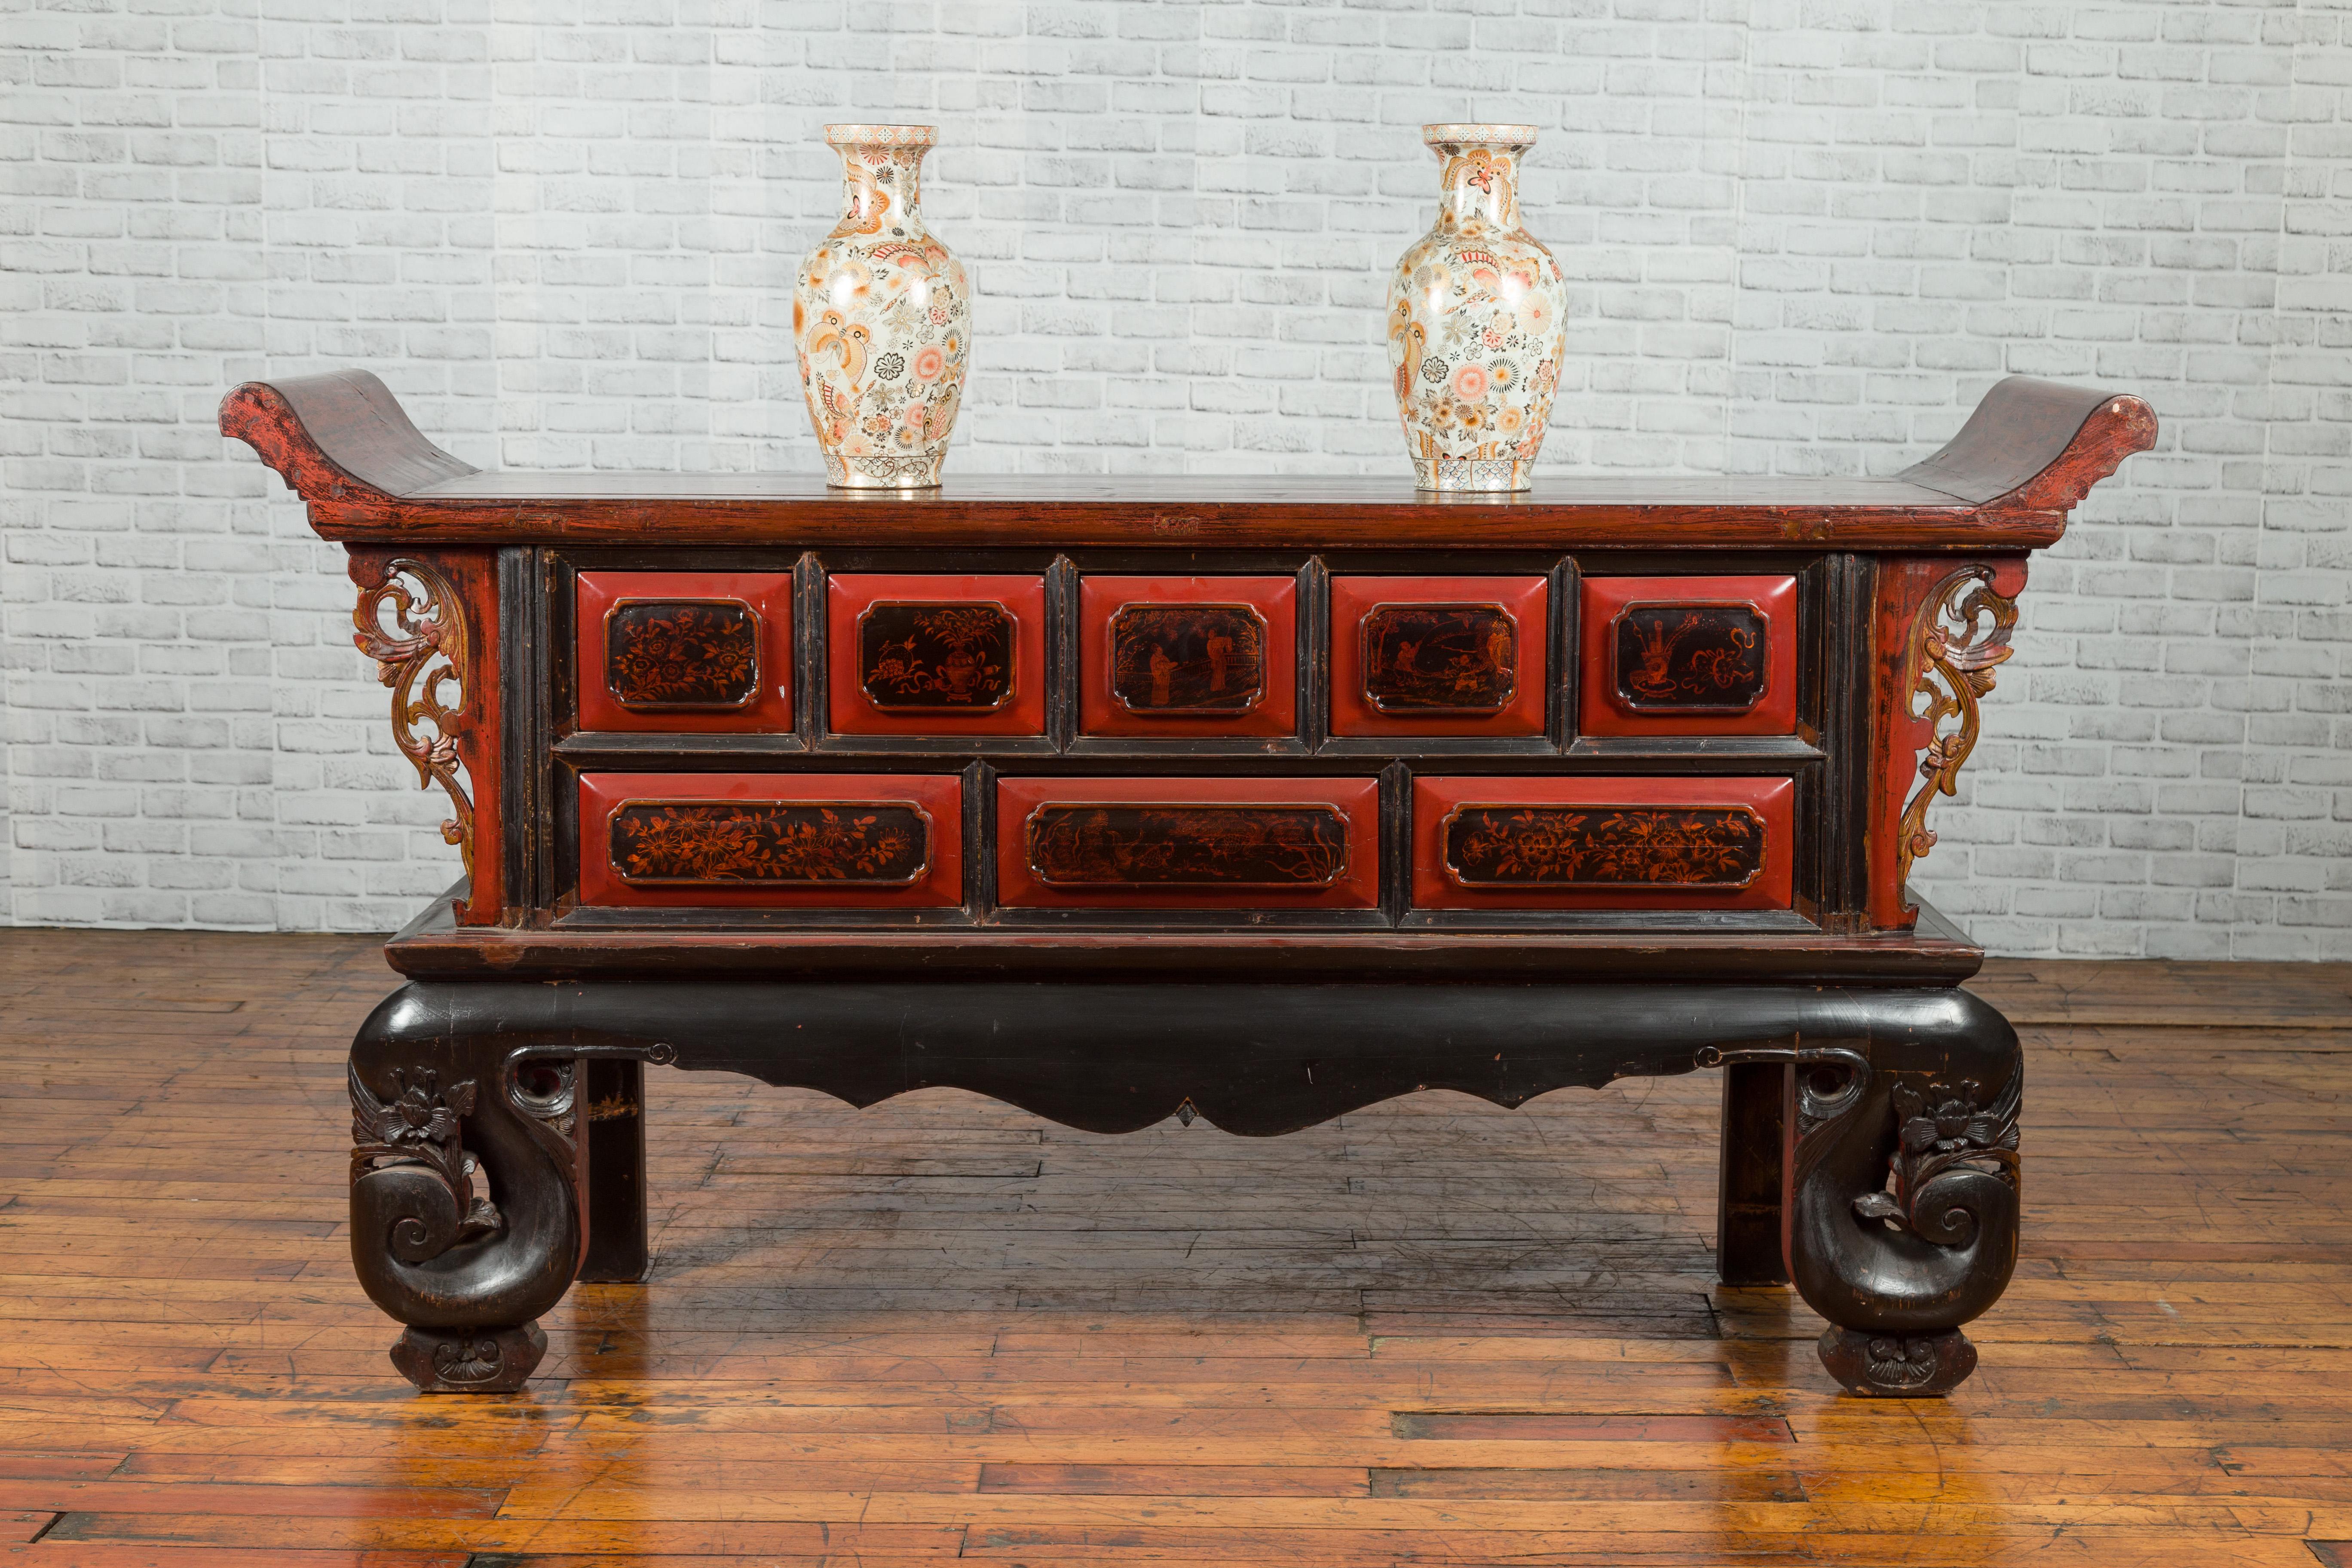 A Chinese red and black lacquered altar coffer table from the 19th century, with figural and floral motifs, everted flanges and carved legs. Created in China during the Qing Dynasty period in the 19th century, this altar coffer table, probably used